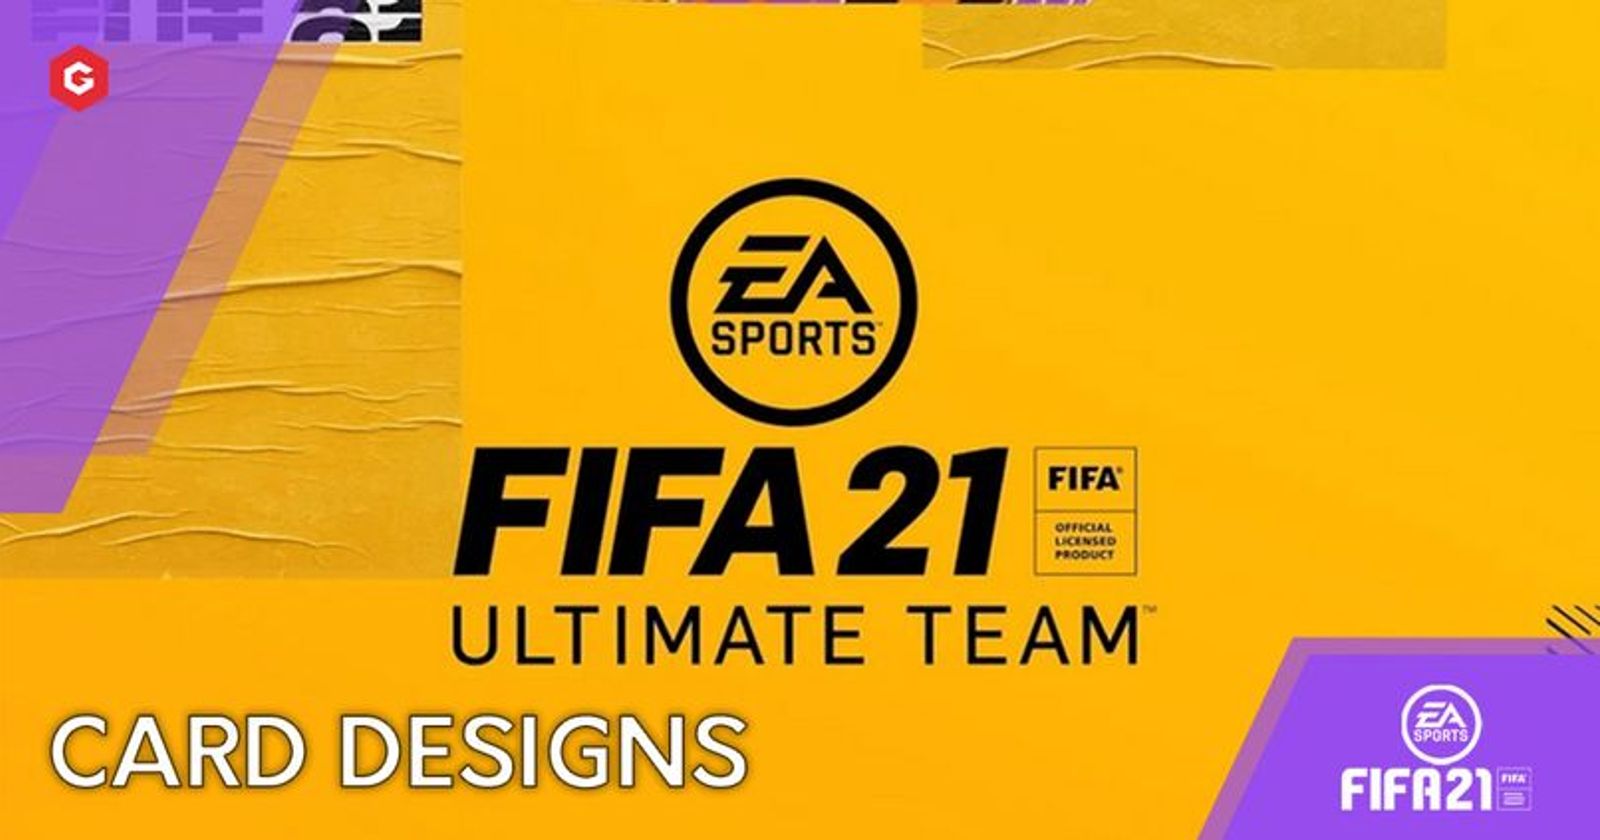 Fifa 21 designs, themes, templates and downloadable graphic